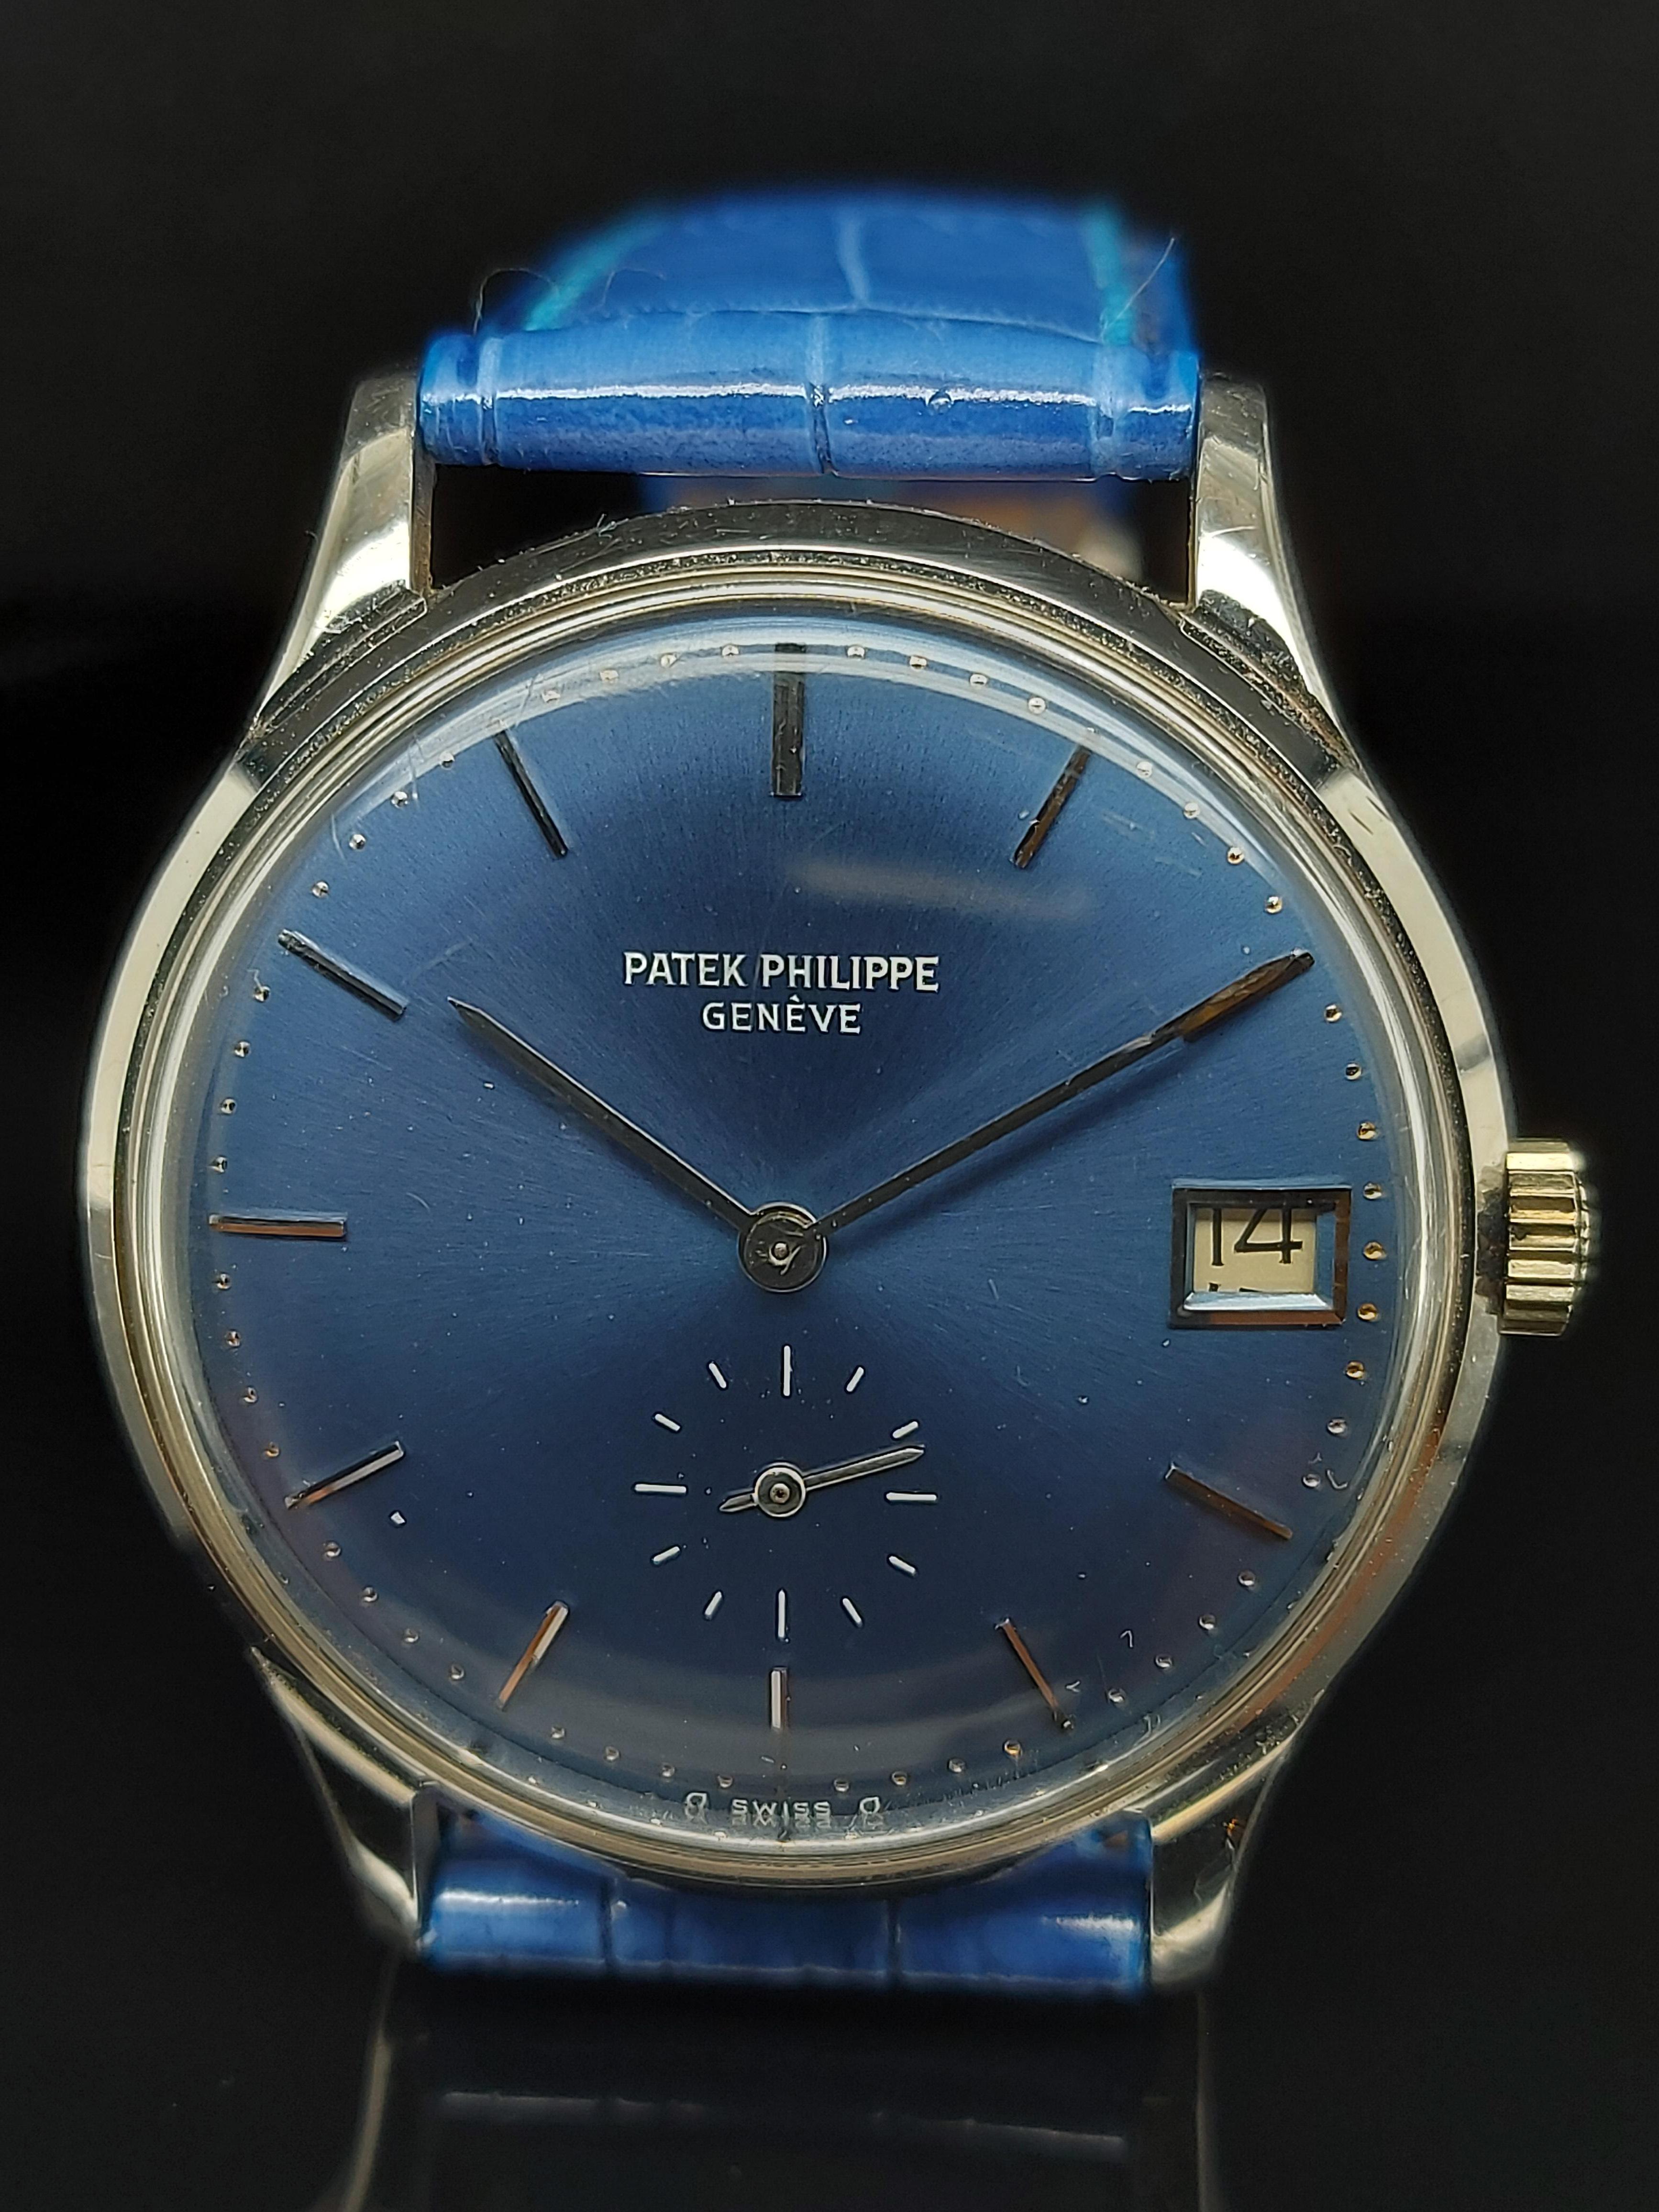 Patek Philippe Calatrava 3514 wristwatch, Automatic, 18kt White Gold Waterproof case, Blue Dial

Movement: Automatic self-winding movement.

Functions: Hour, Minutes, Small seconds, Date display at the 3 o'clock position.

Case: 18K White Gold case,